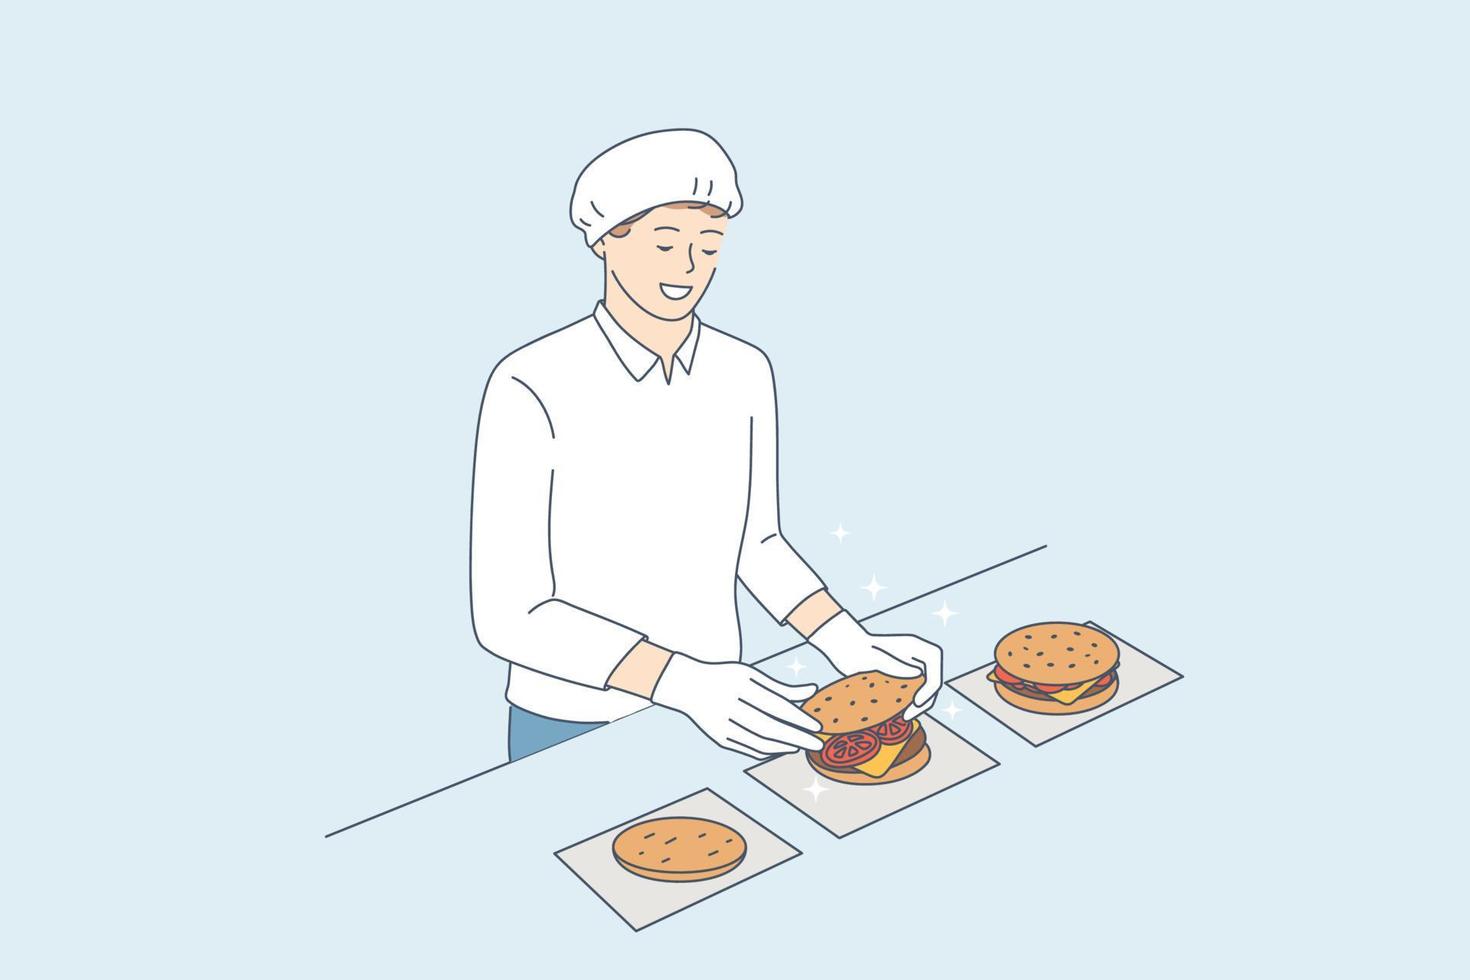 Cooking burgers and junk food cafe concept. Young smiling man chef in uniform and apron cartoon character standing and cooking cheeseburgers in restaurant kitchen vector illustration